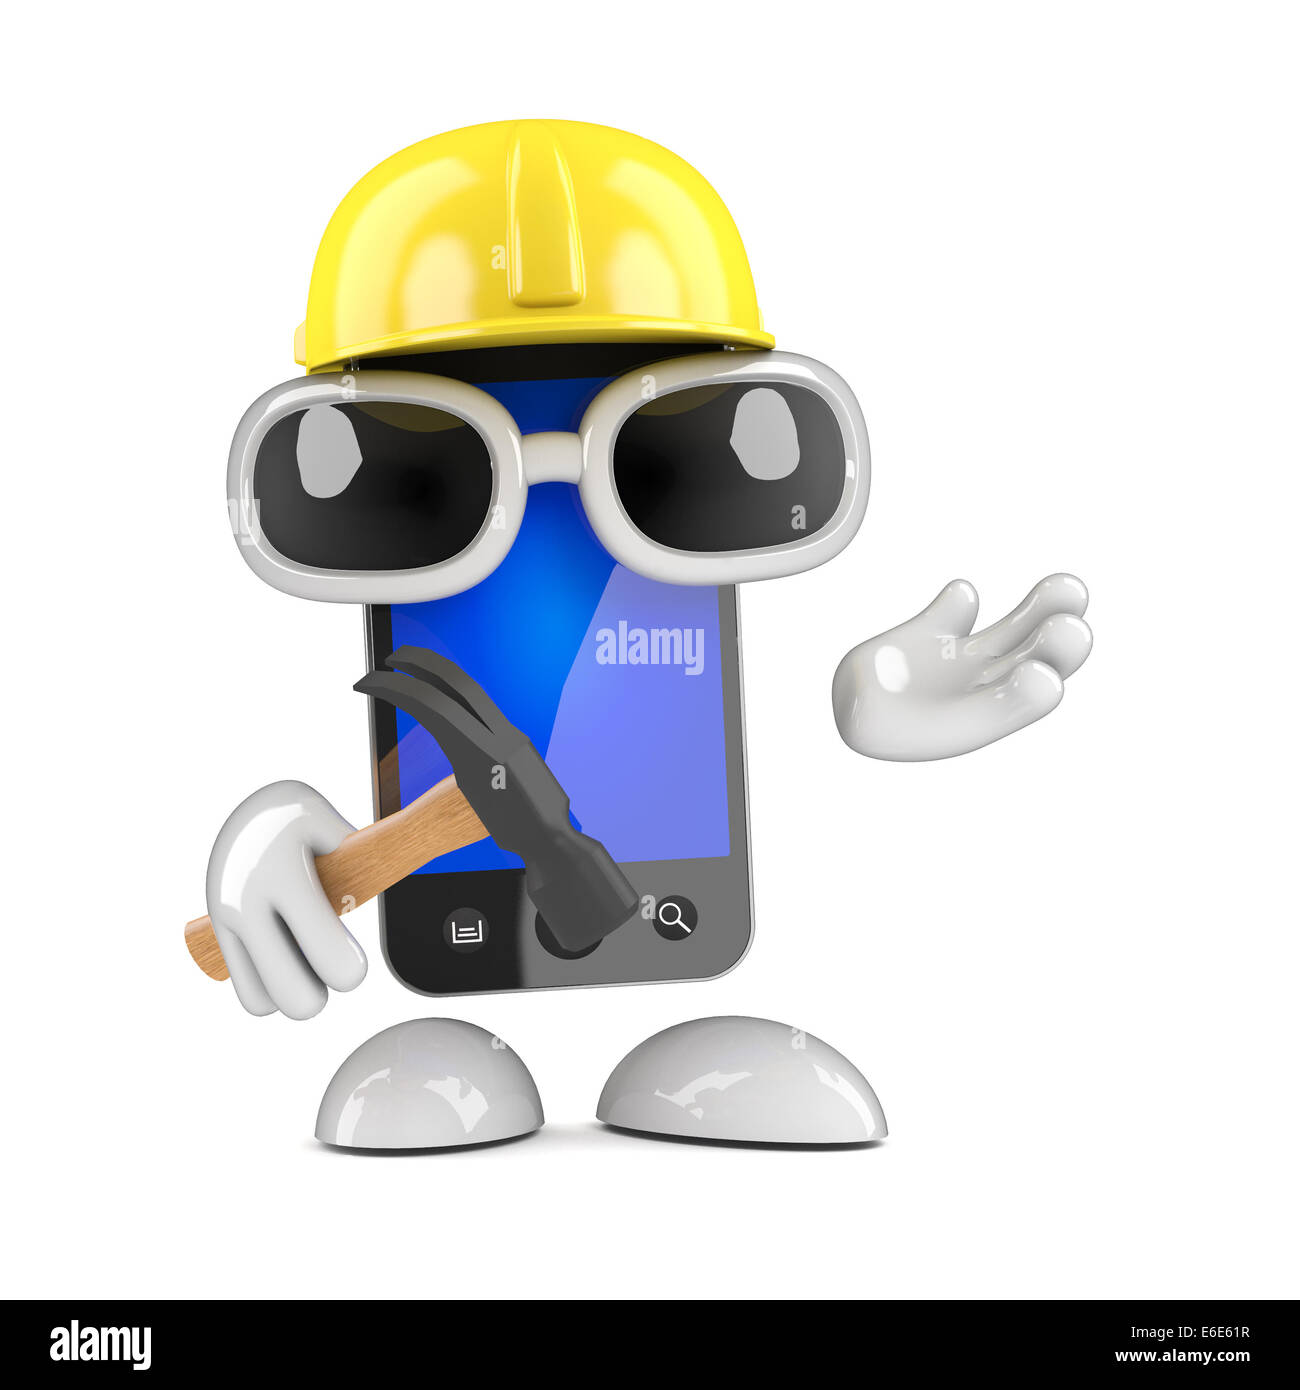 3d render of a smartphone wearing a construction workers hat and holding a hammer Stock Photo